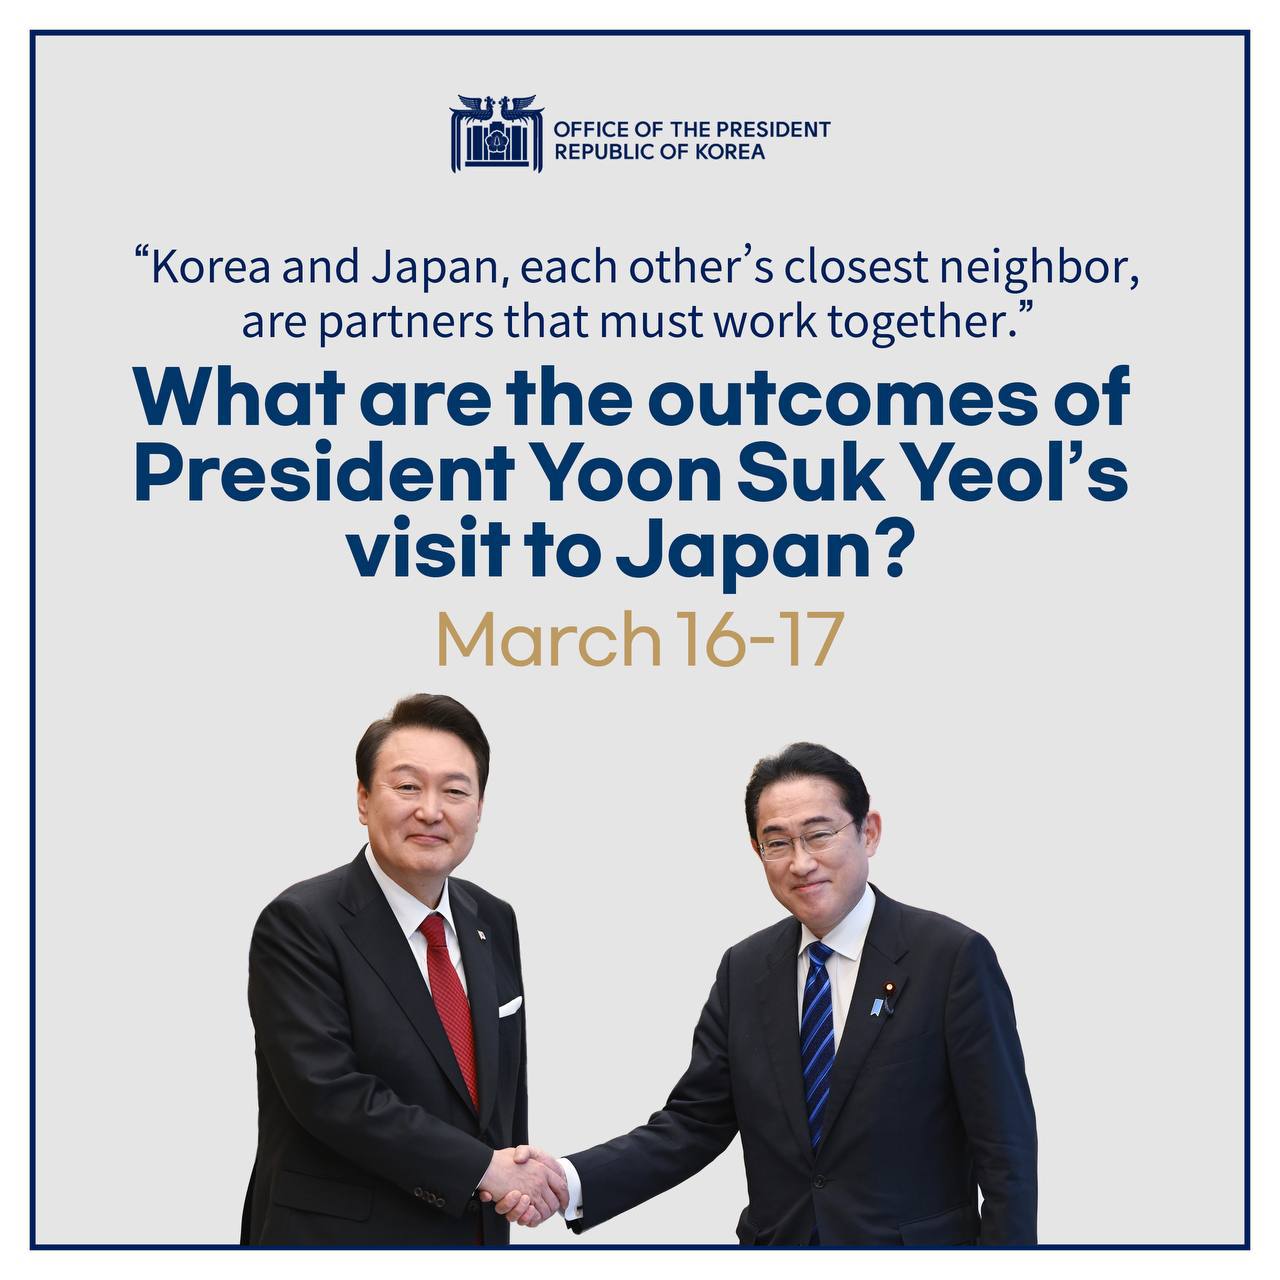 Two-day Visit to Japan, Korea's Closest Neighbor, Brings Cooperation for the Economy, Security and Future Generations